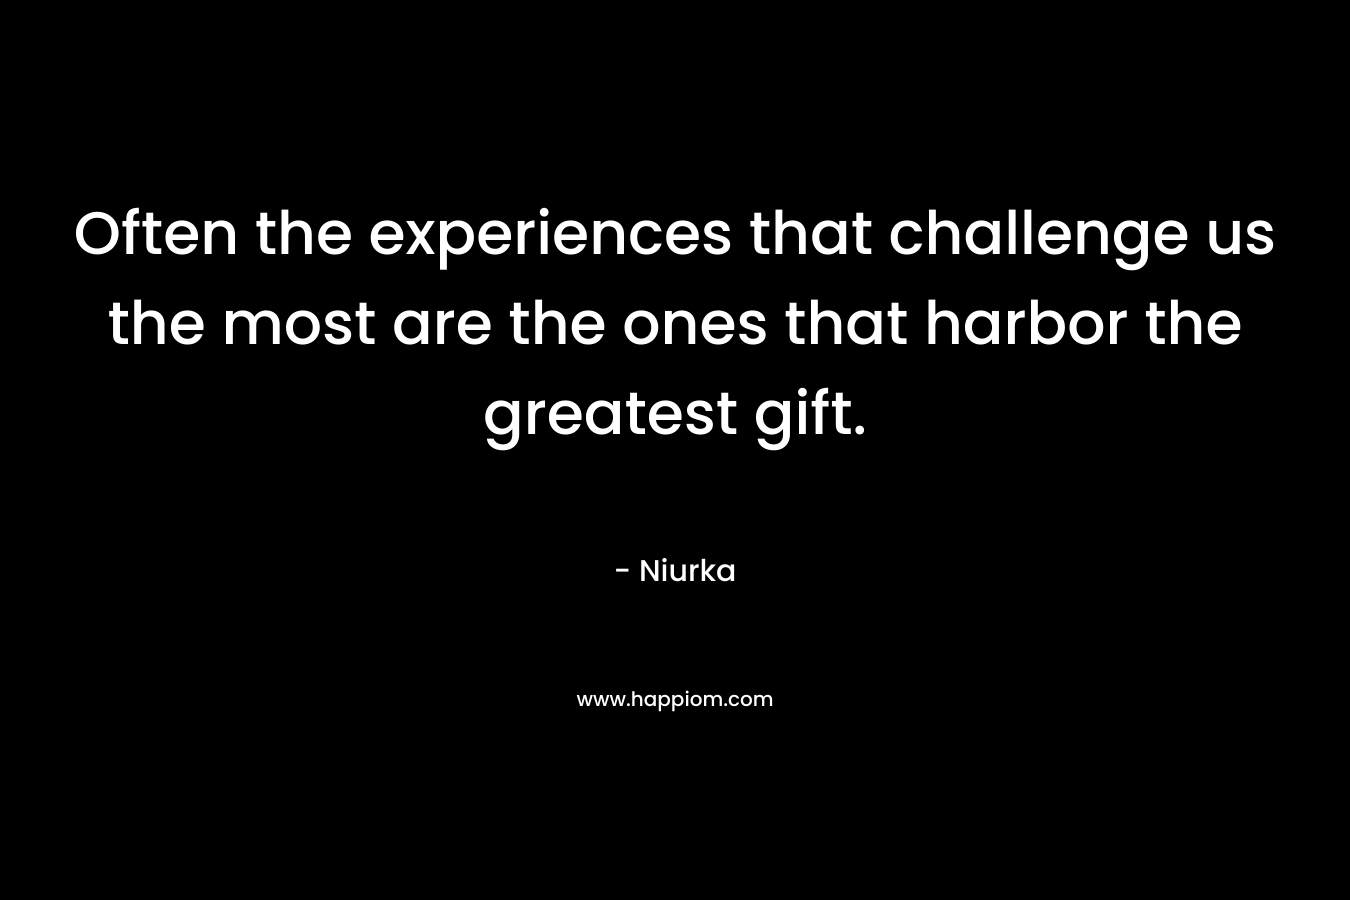 Often the experiences that challenge us the most are the ones that harbor the greatest gift. – Niurka